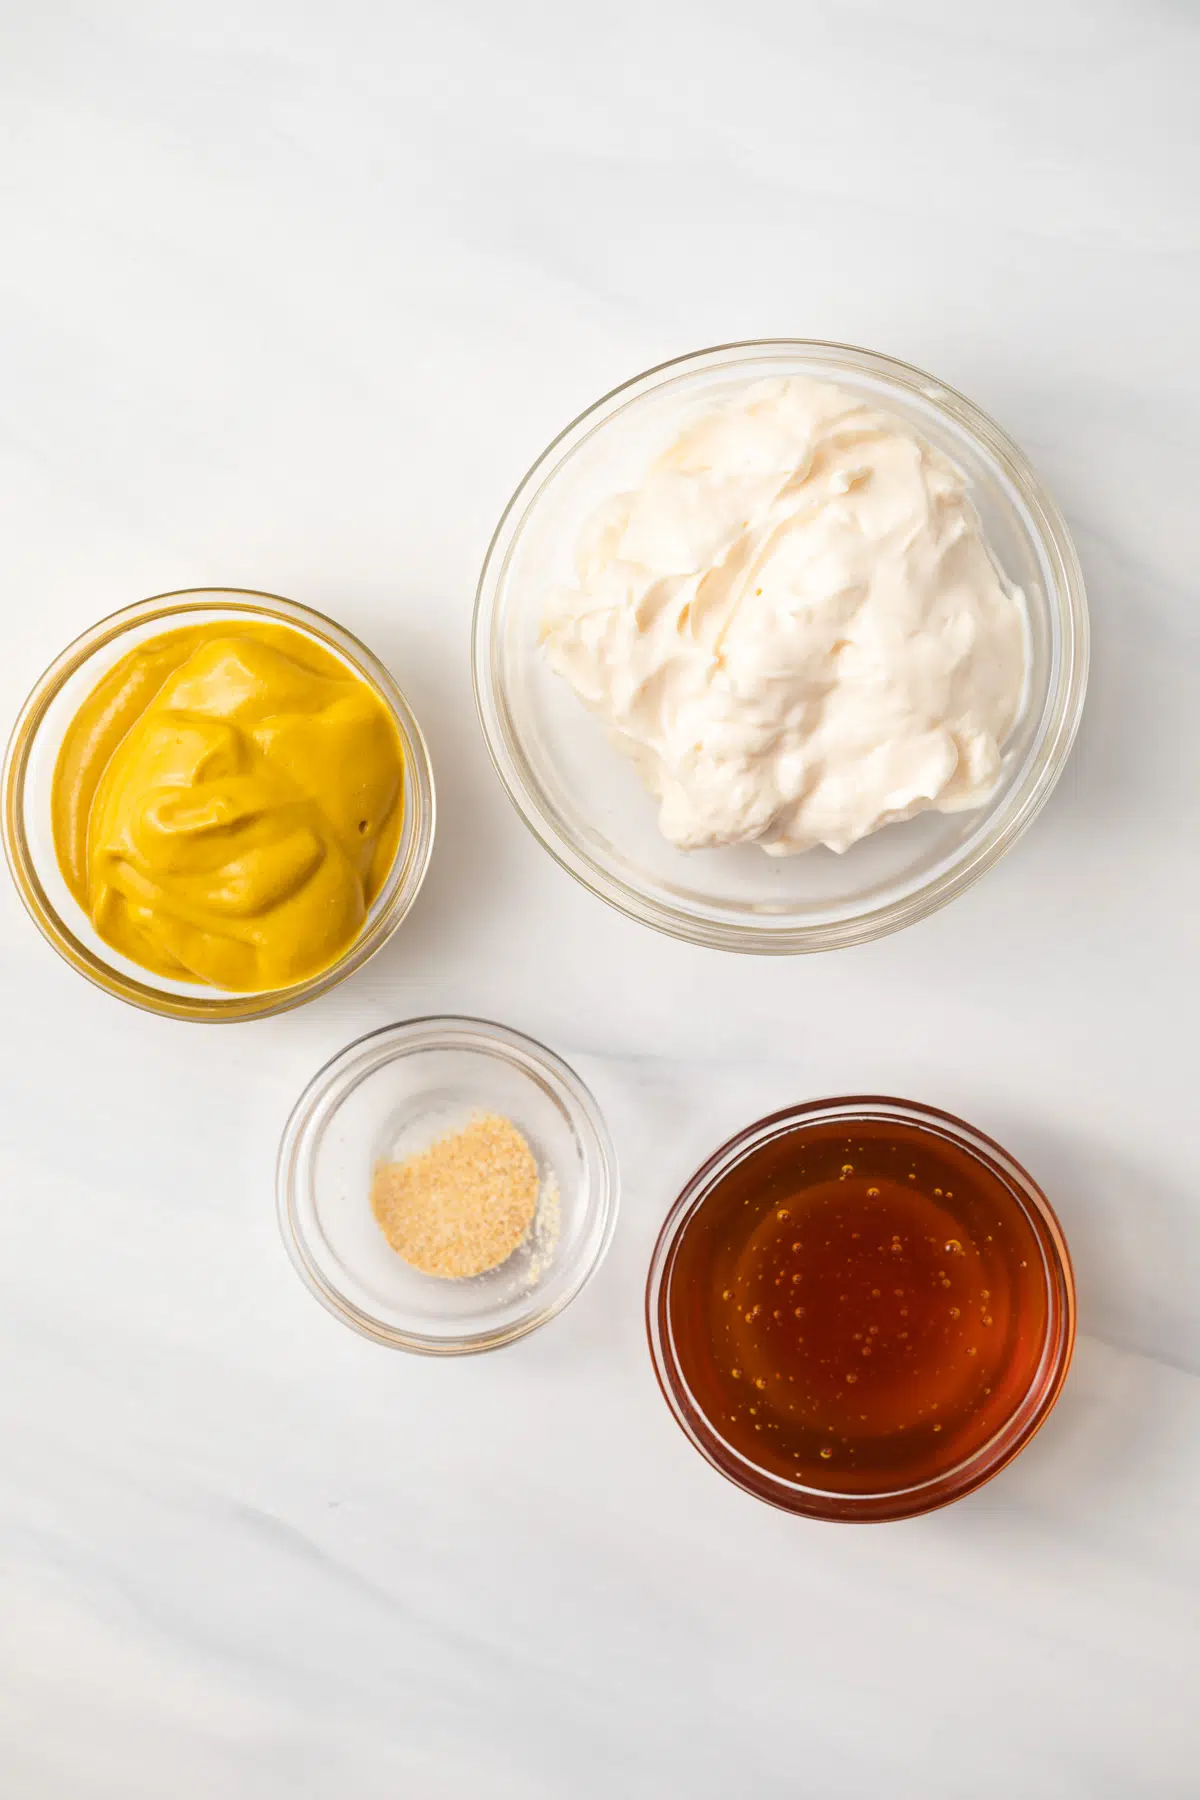 Ingredients for honey mustard in glass bowls.